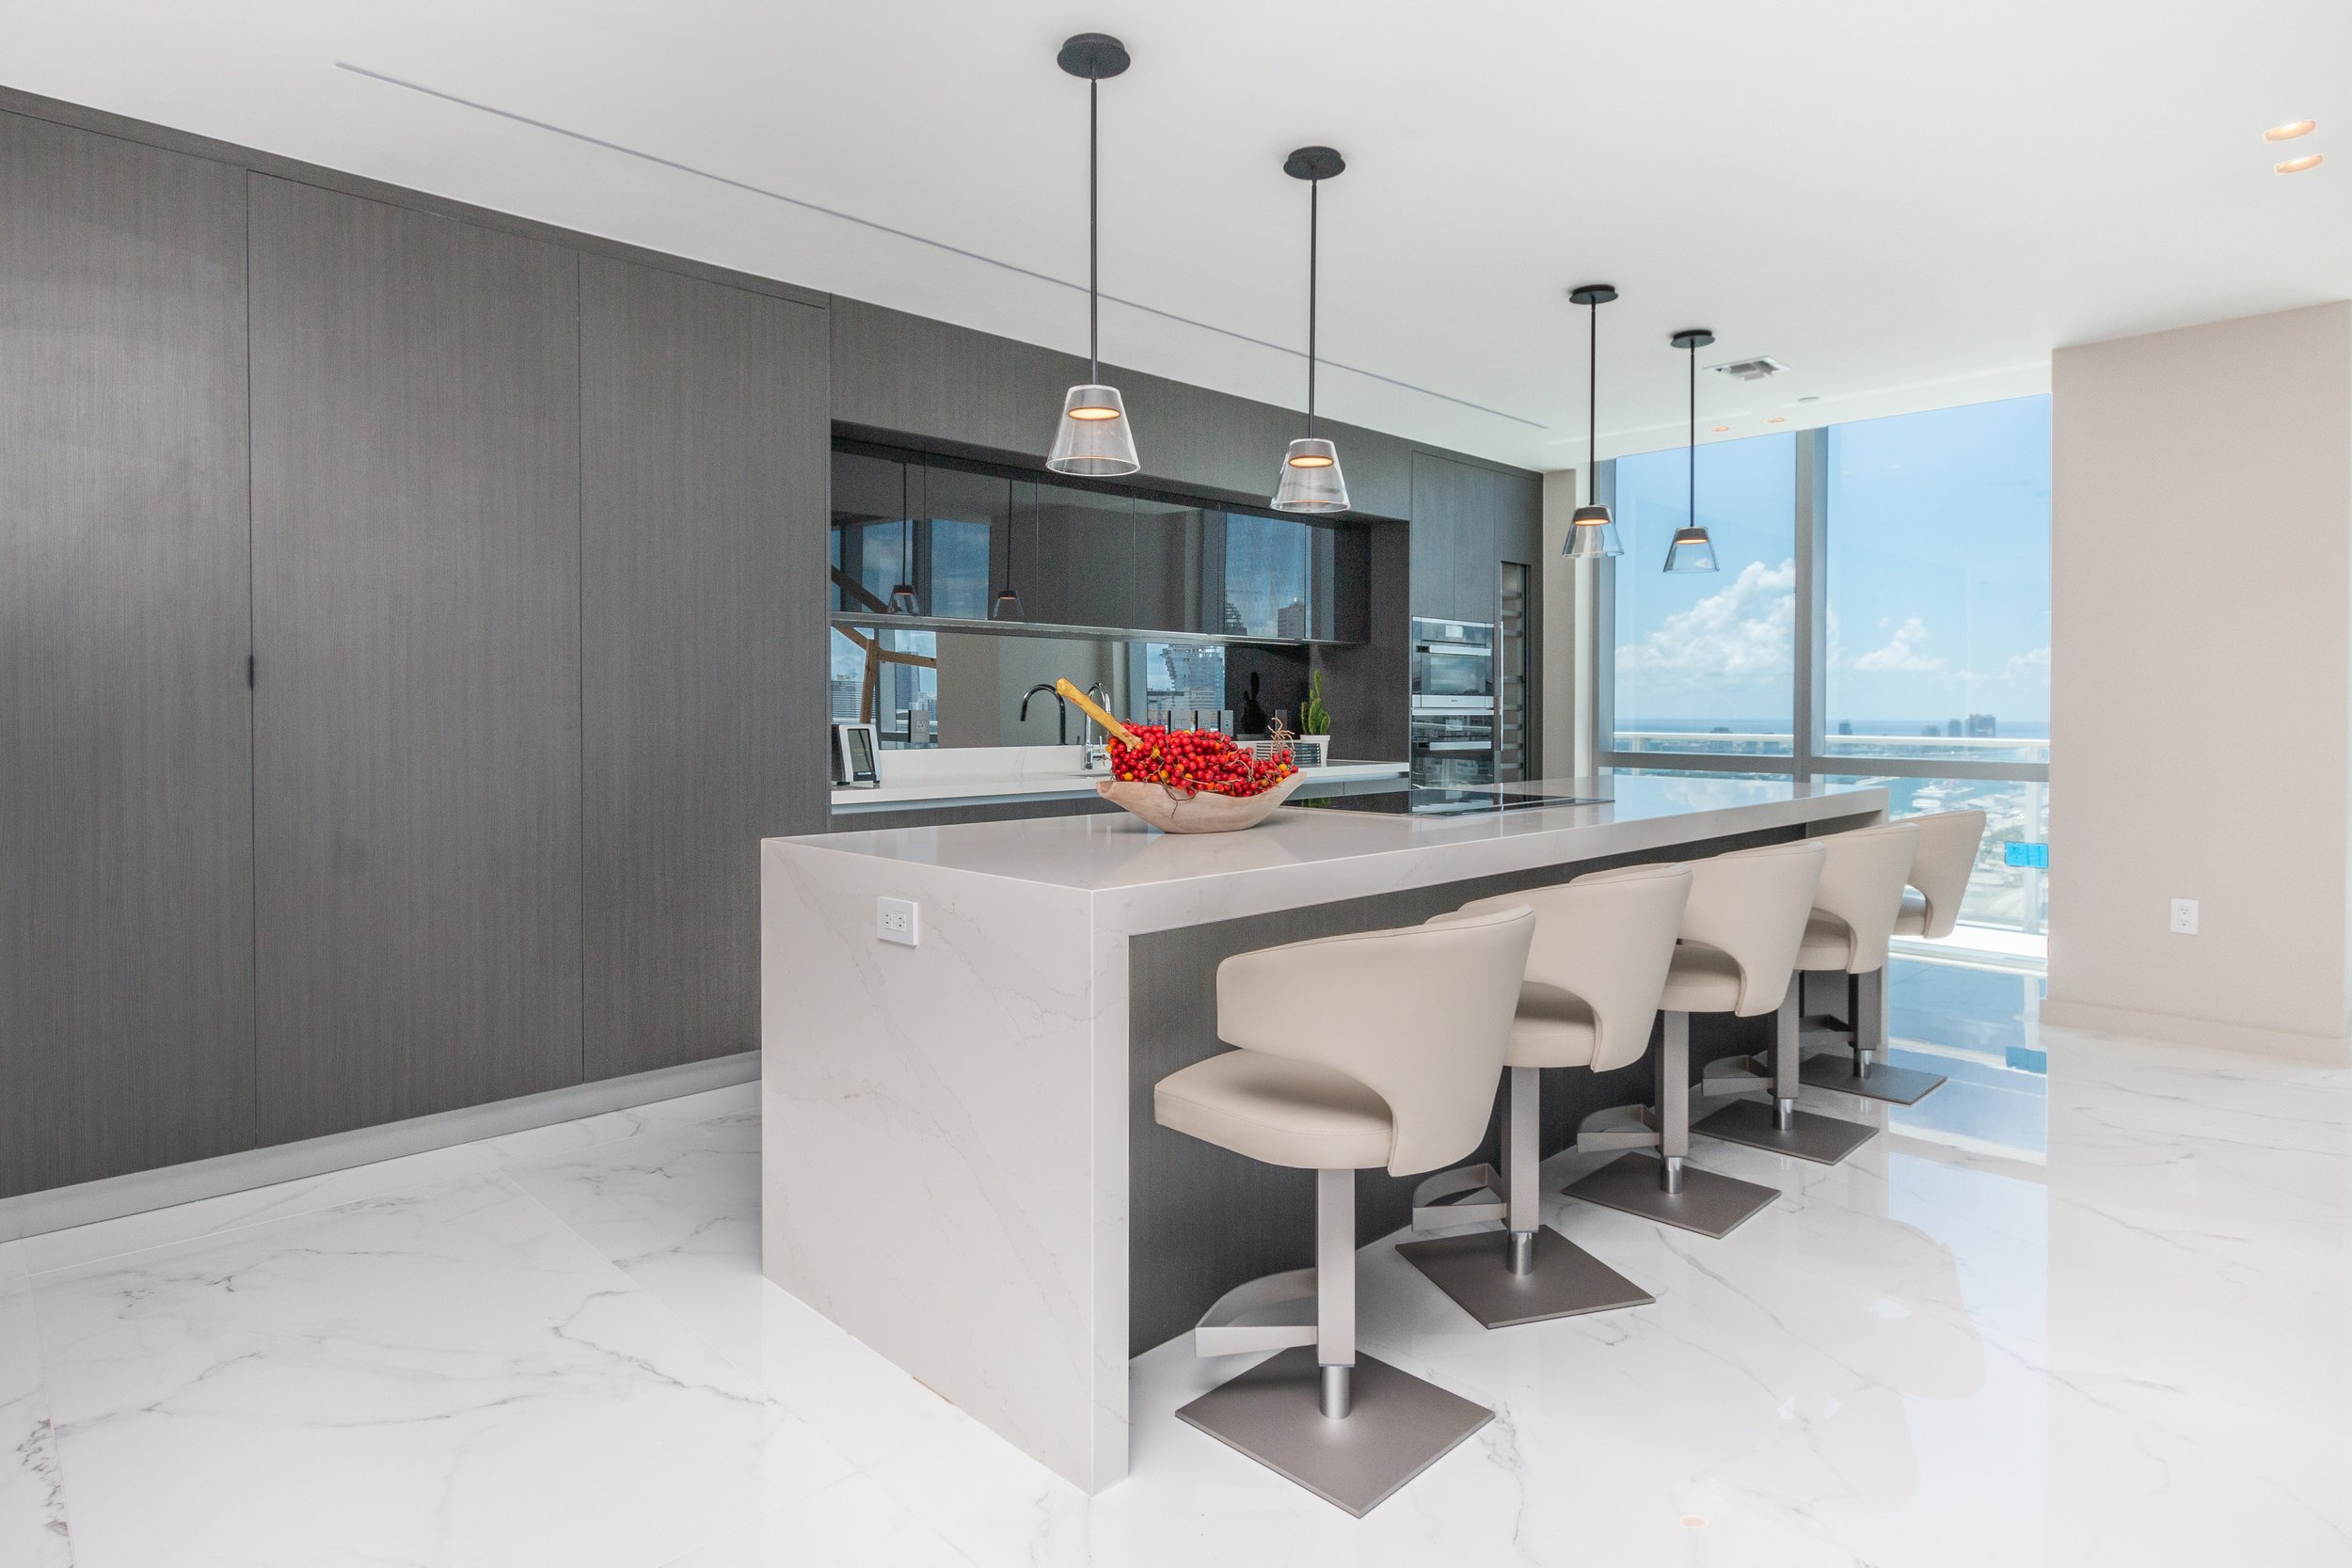 Step Inside A Sky-High Ultra-Luxe Penthouse At PARAMOUNT Miami Worldcenter For Rent Asking $40K Per Month ALTARA Properties Scott Lawrence Porter 1.26.jpg